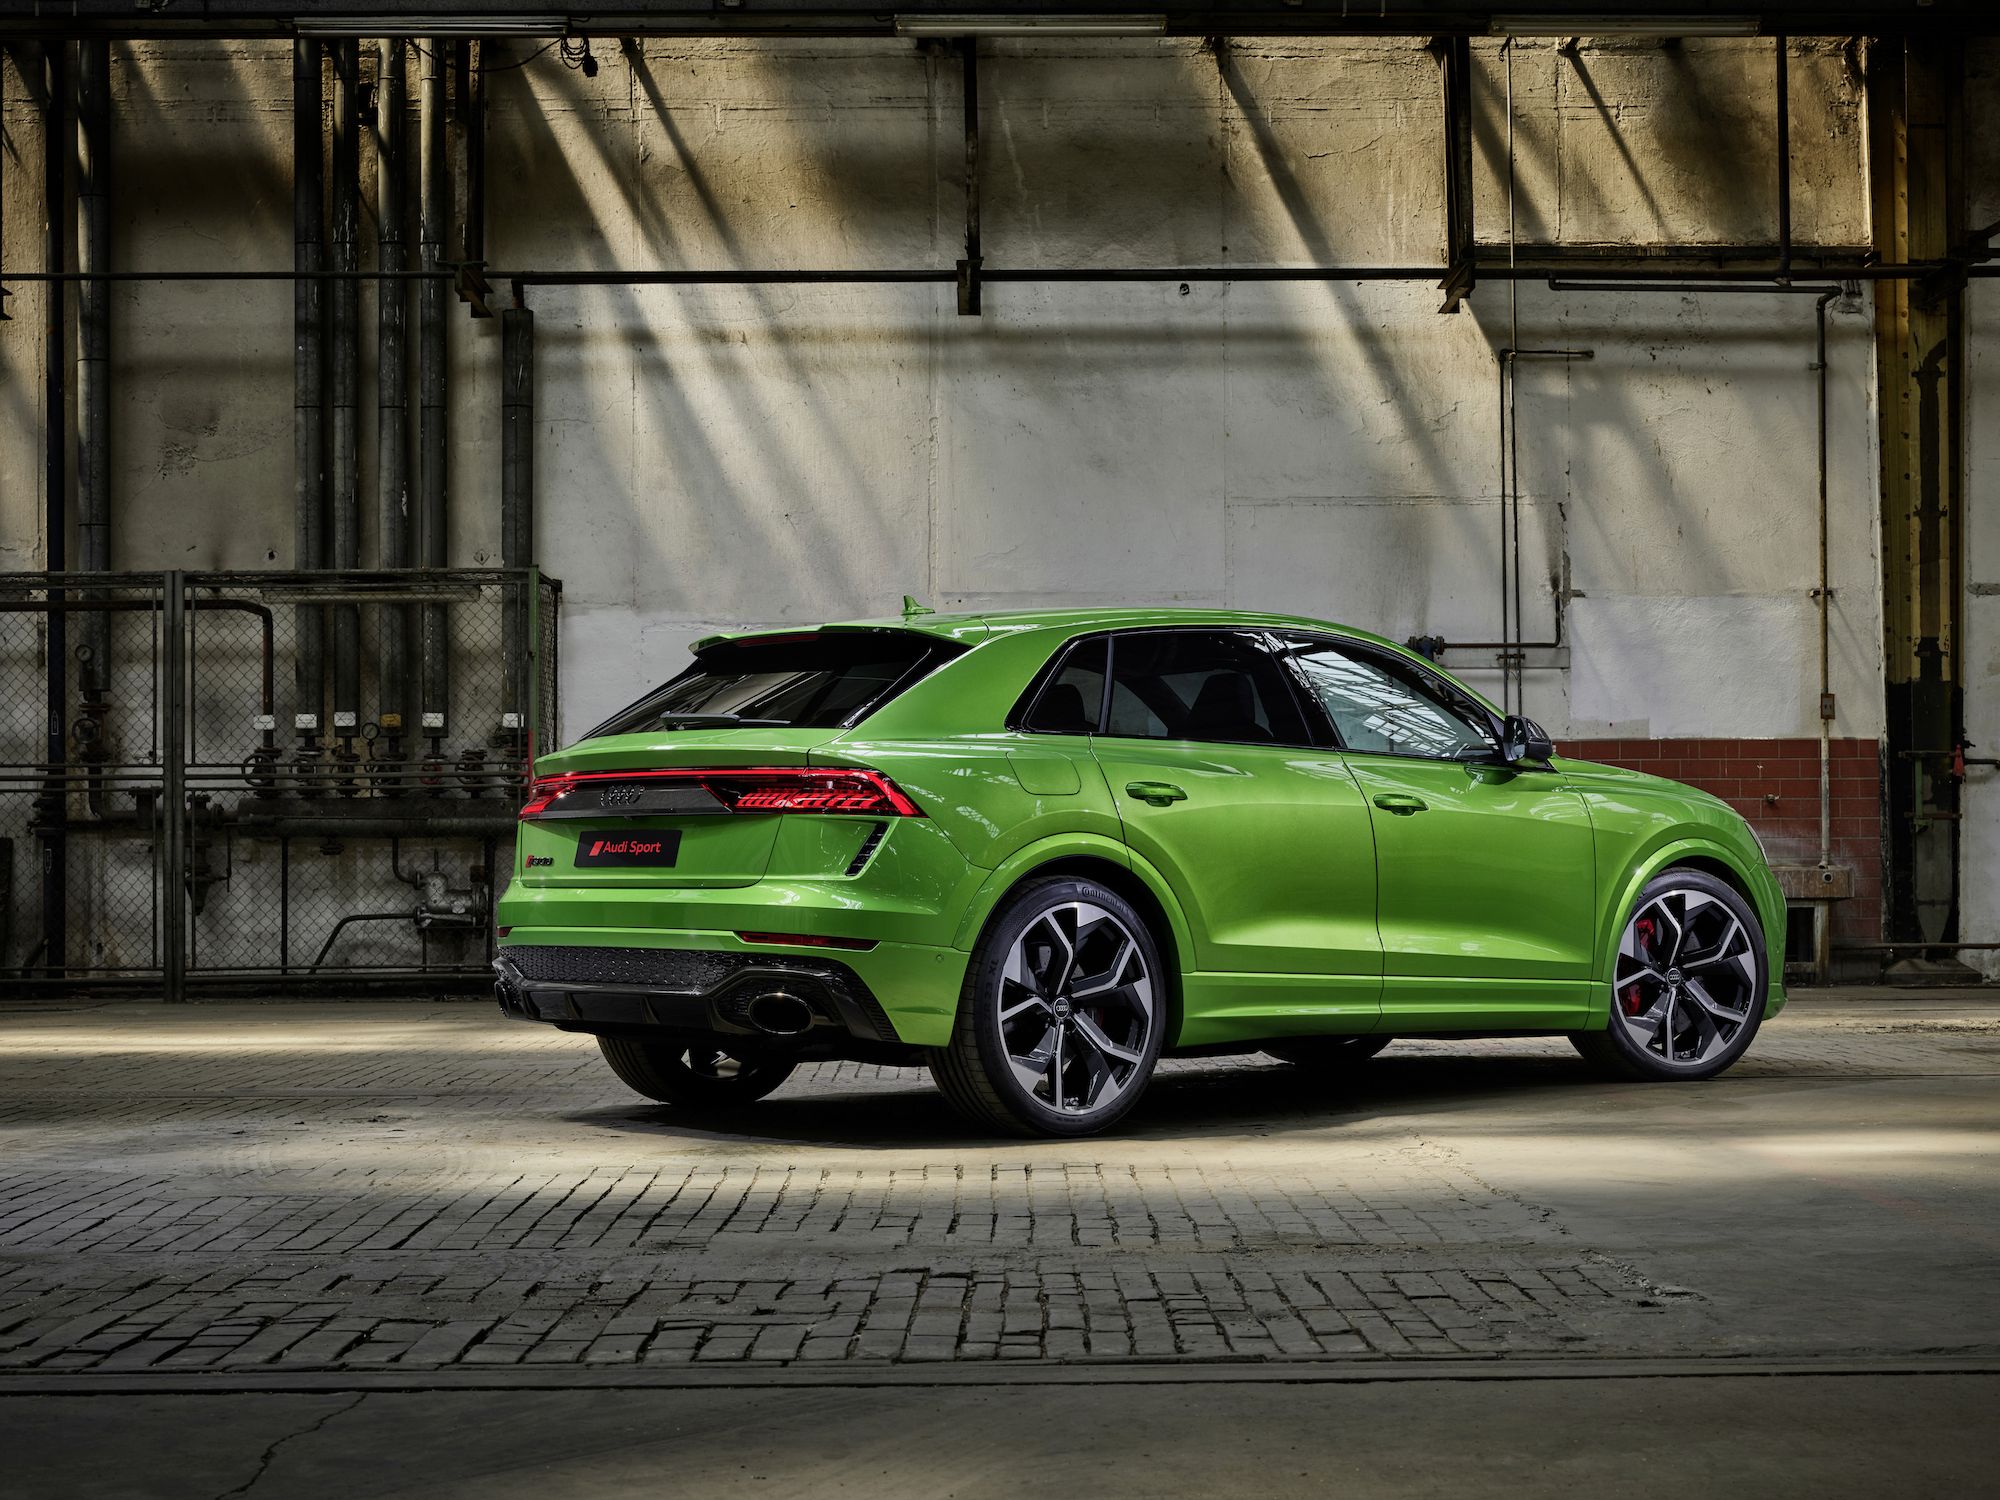 2020 Audi RS Q8 SUV Revealed With 600 HP - Pictures, Specs, Info